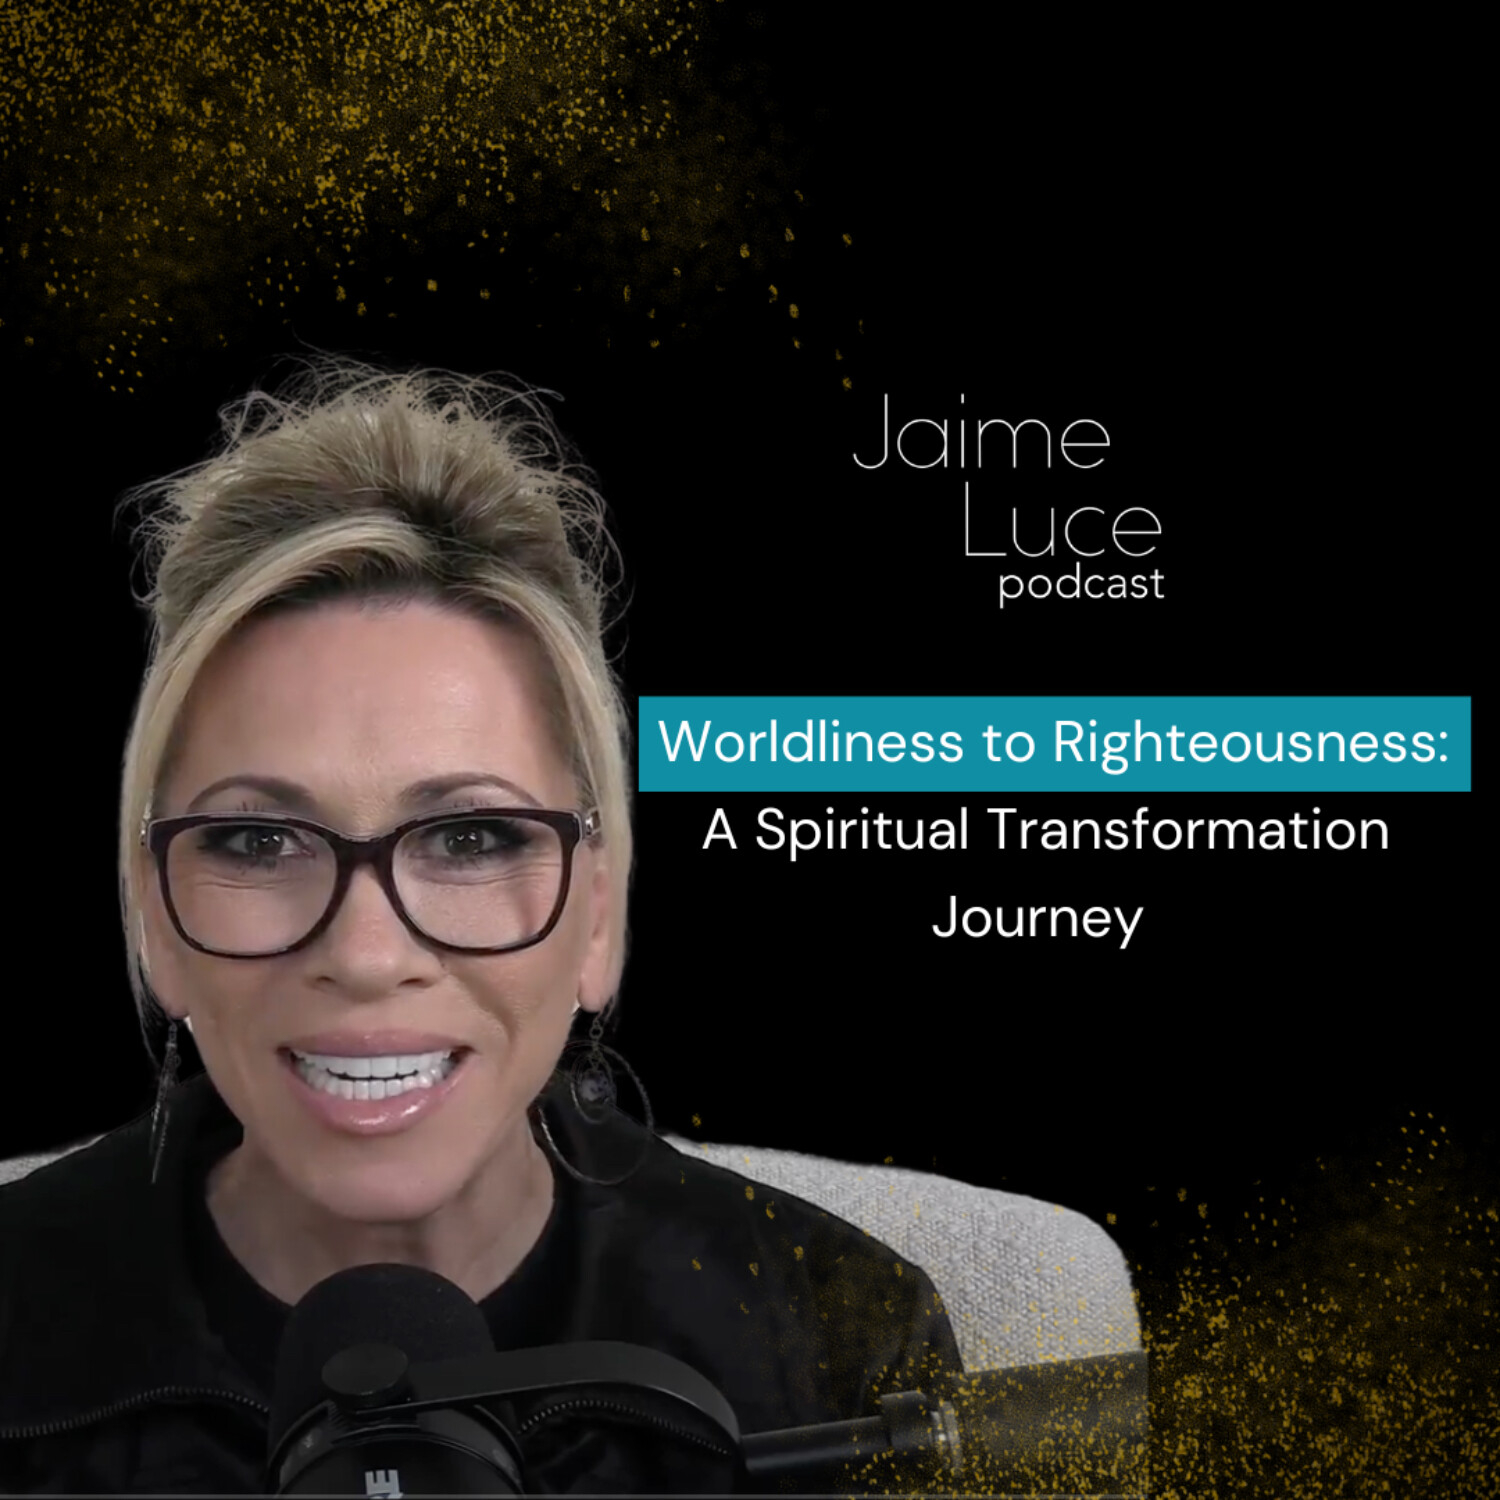 Worldliness to Righteousness: A Spiritual Transformation Journey